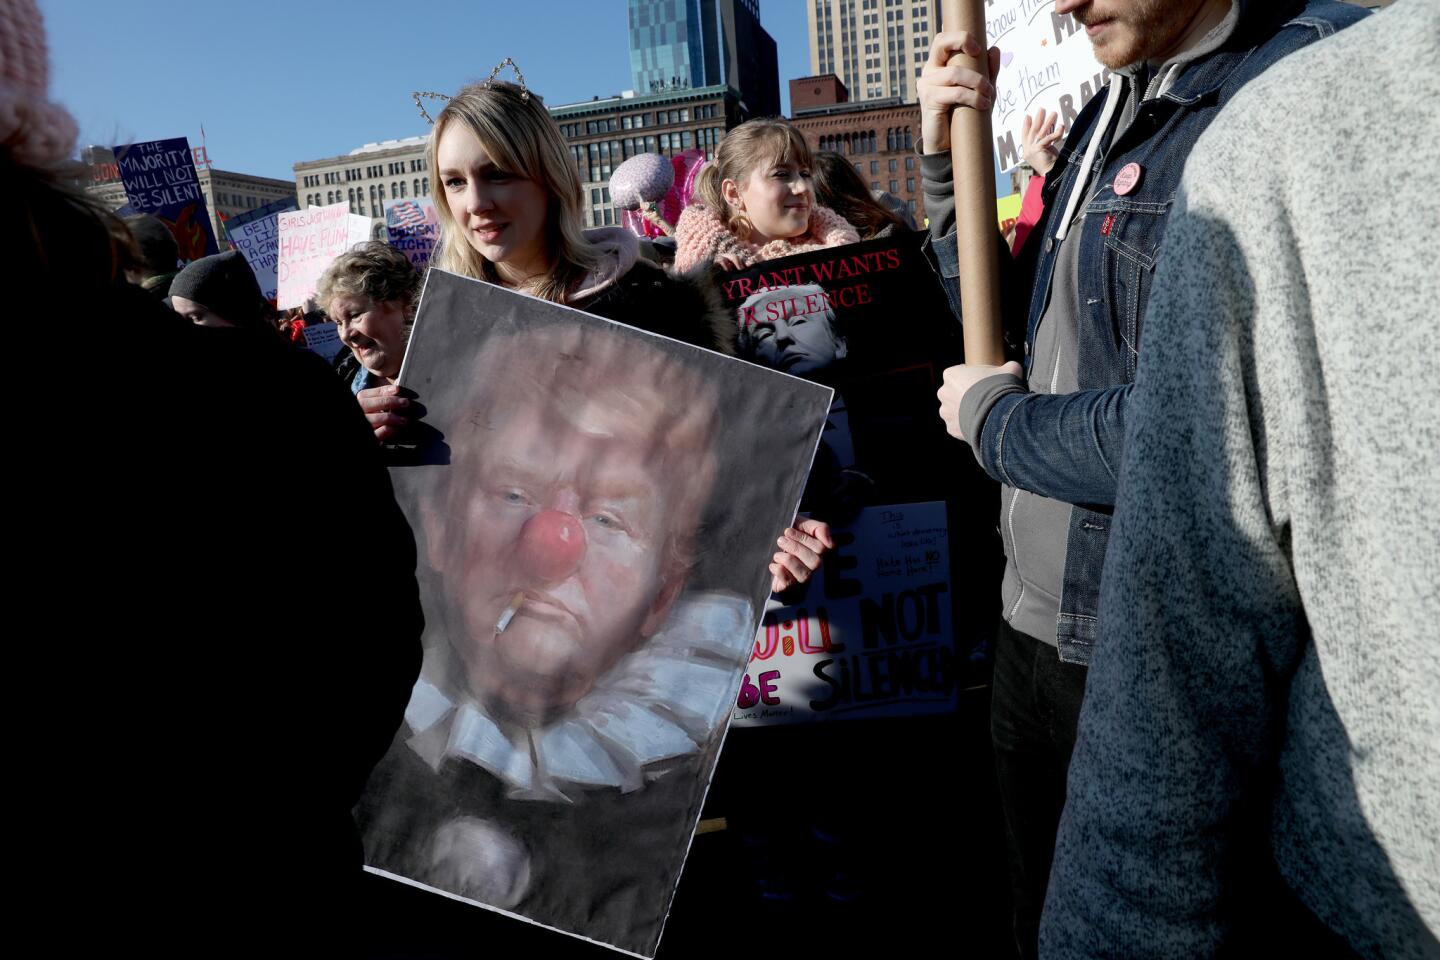 Lucy Lindgren holds a poster while marching with others into Grant Park for the Women's March in Chicago on Jan. 21, 2017.